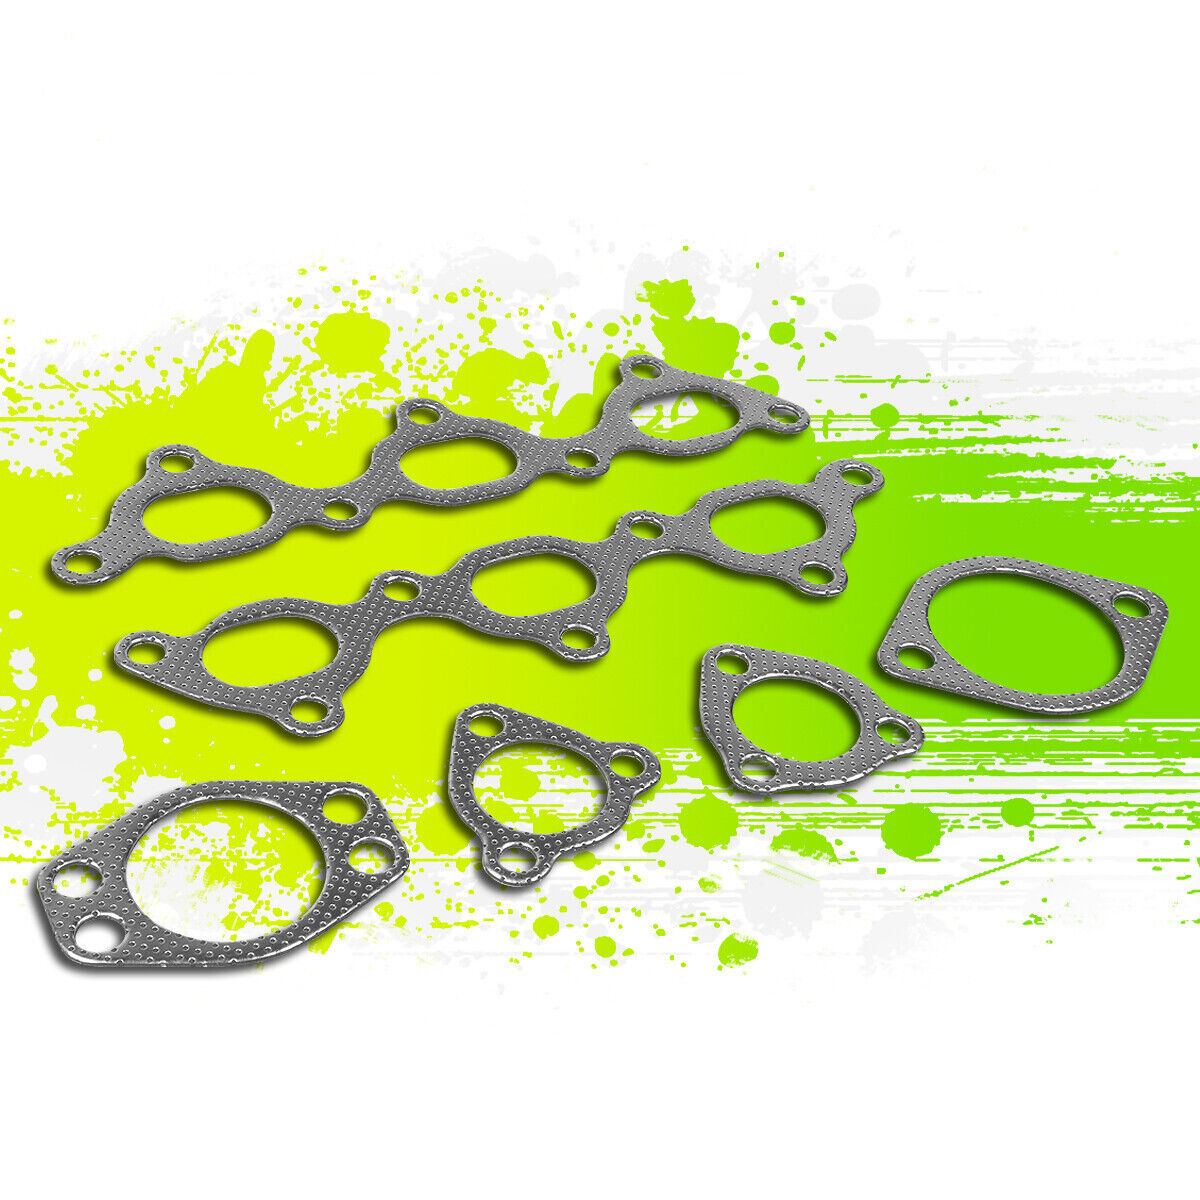 FOR 91-99 3000GT VR-4/STEALTH R/T TURBO 3.0L EXHAUST HEADER GASKET 95 96 97 98